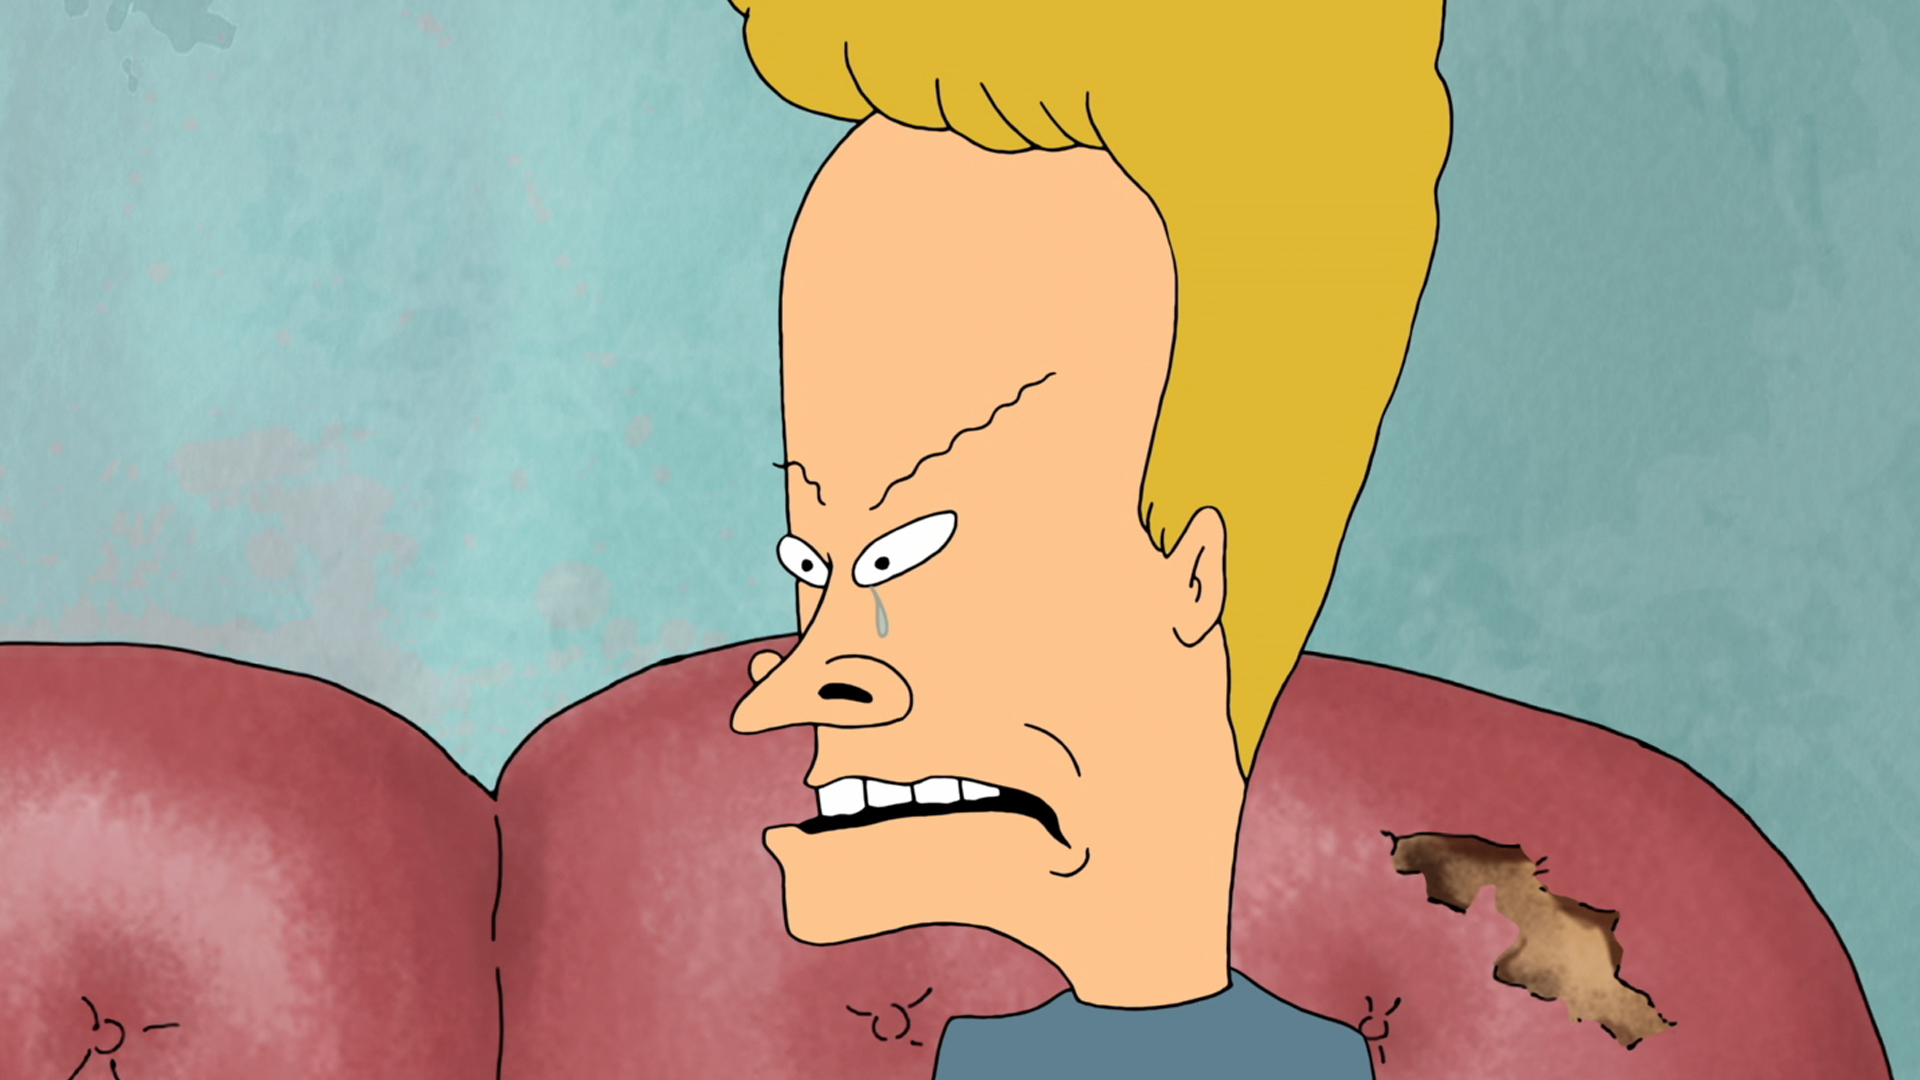 Watch Beavis and ButtHead Season 8 Episode 2 Crying Full show on